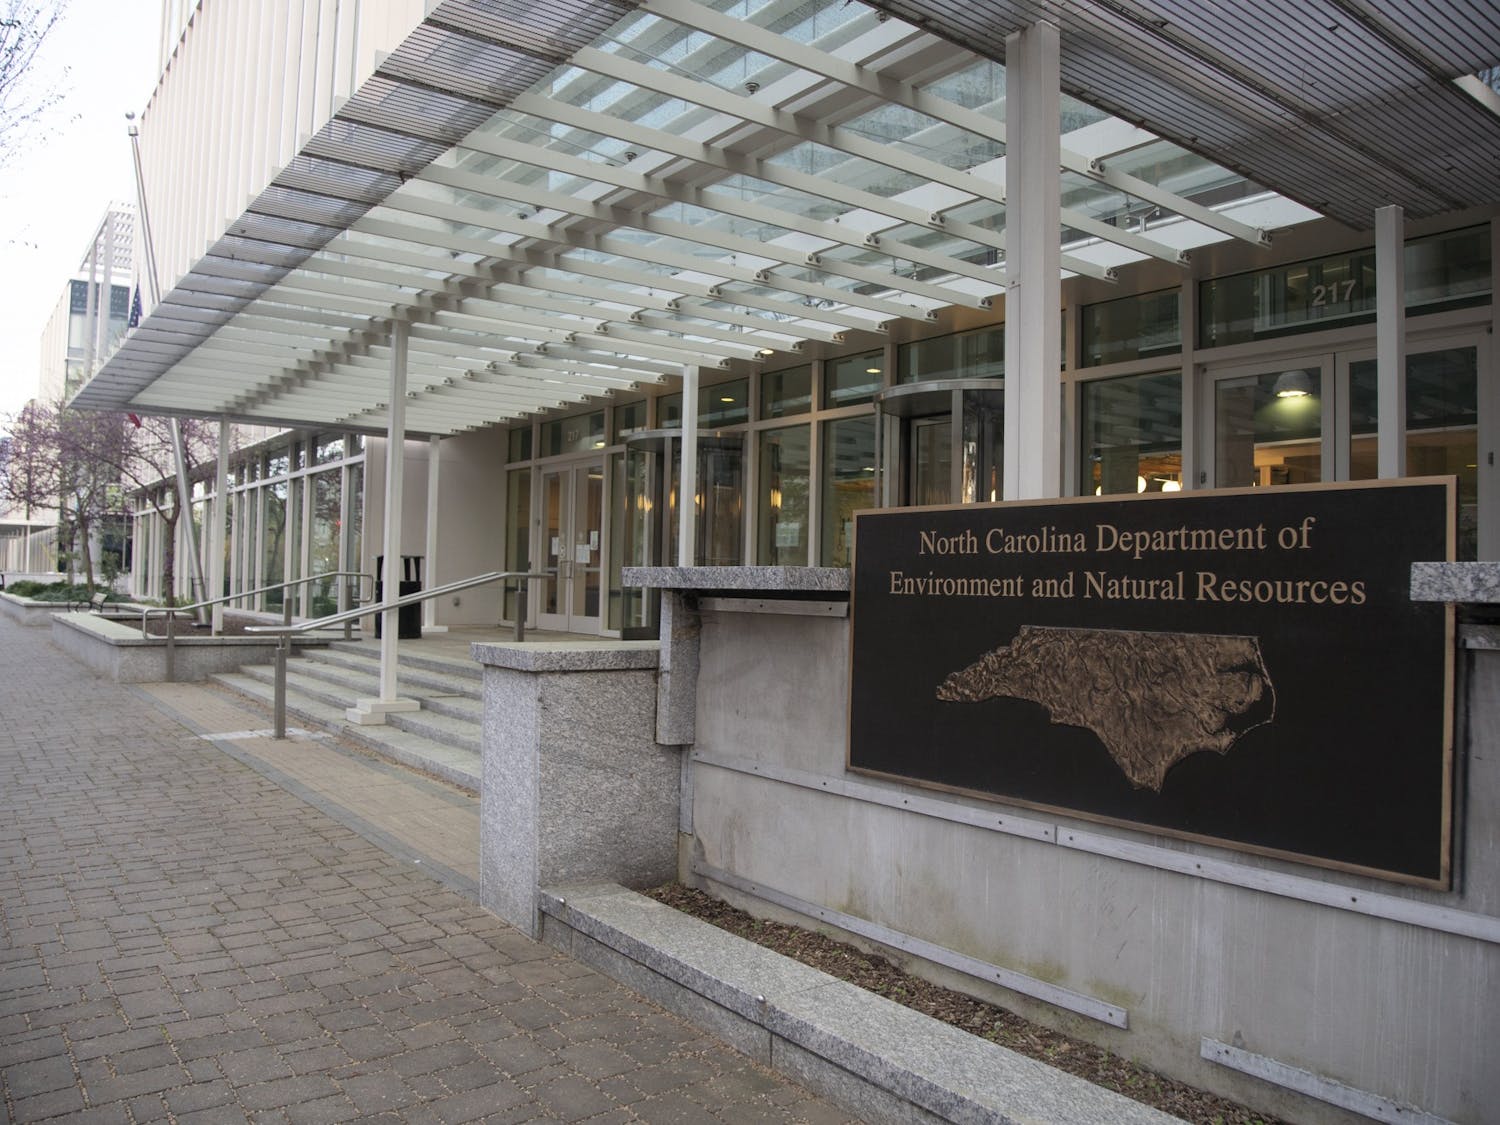 The N.C. Department of Environment and Natural Resources building pictured on March 30, 2020 in downtown Raleigh. Various environmental agencies have faced budget cuts and fewer staff members over the past few years.